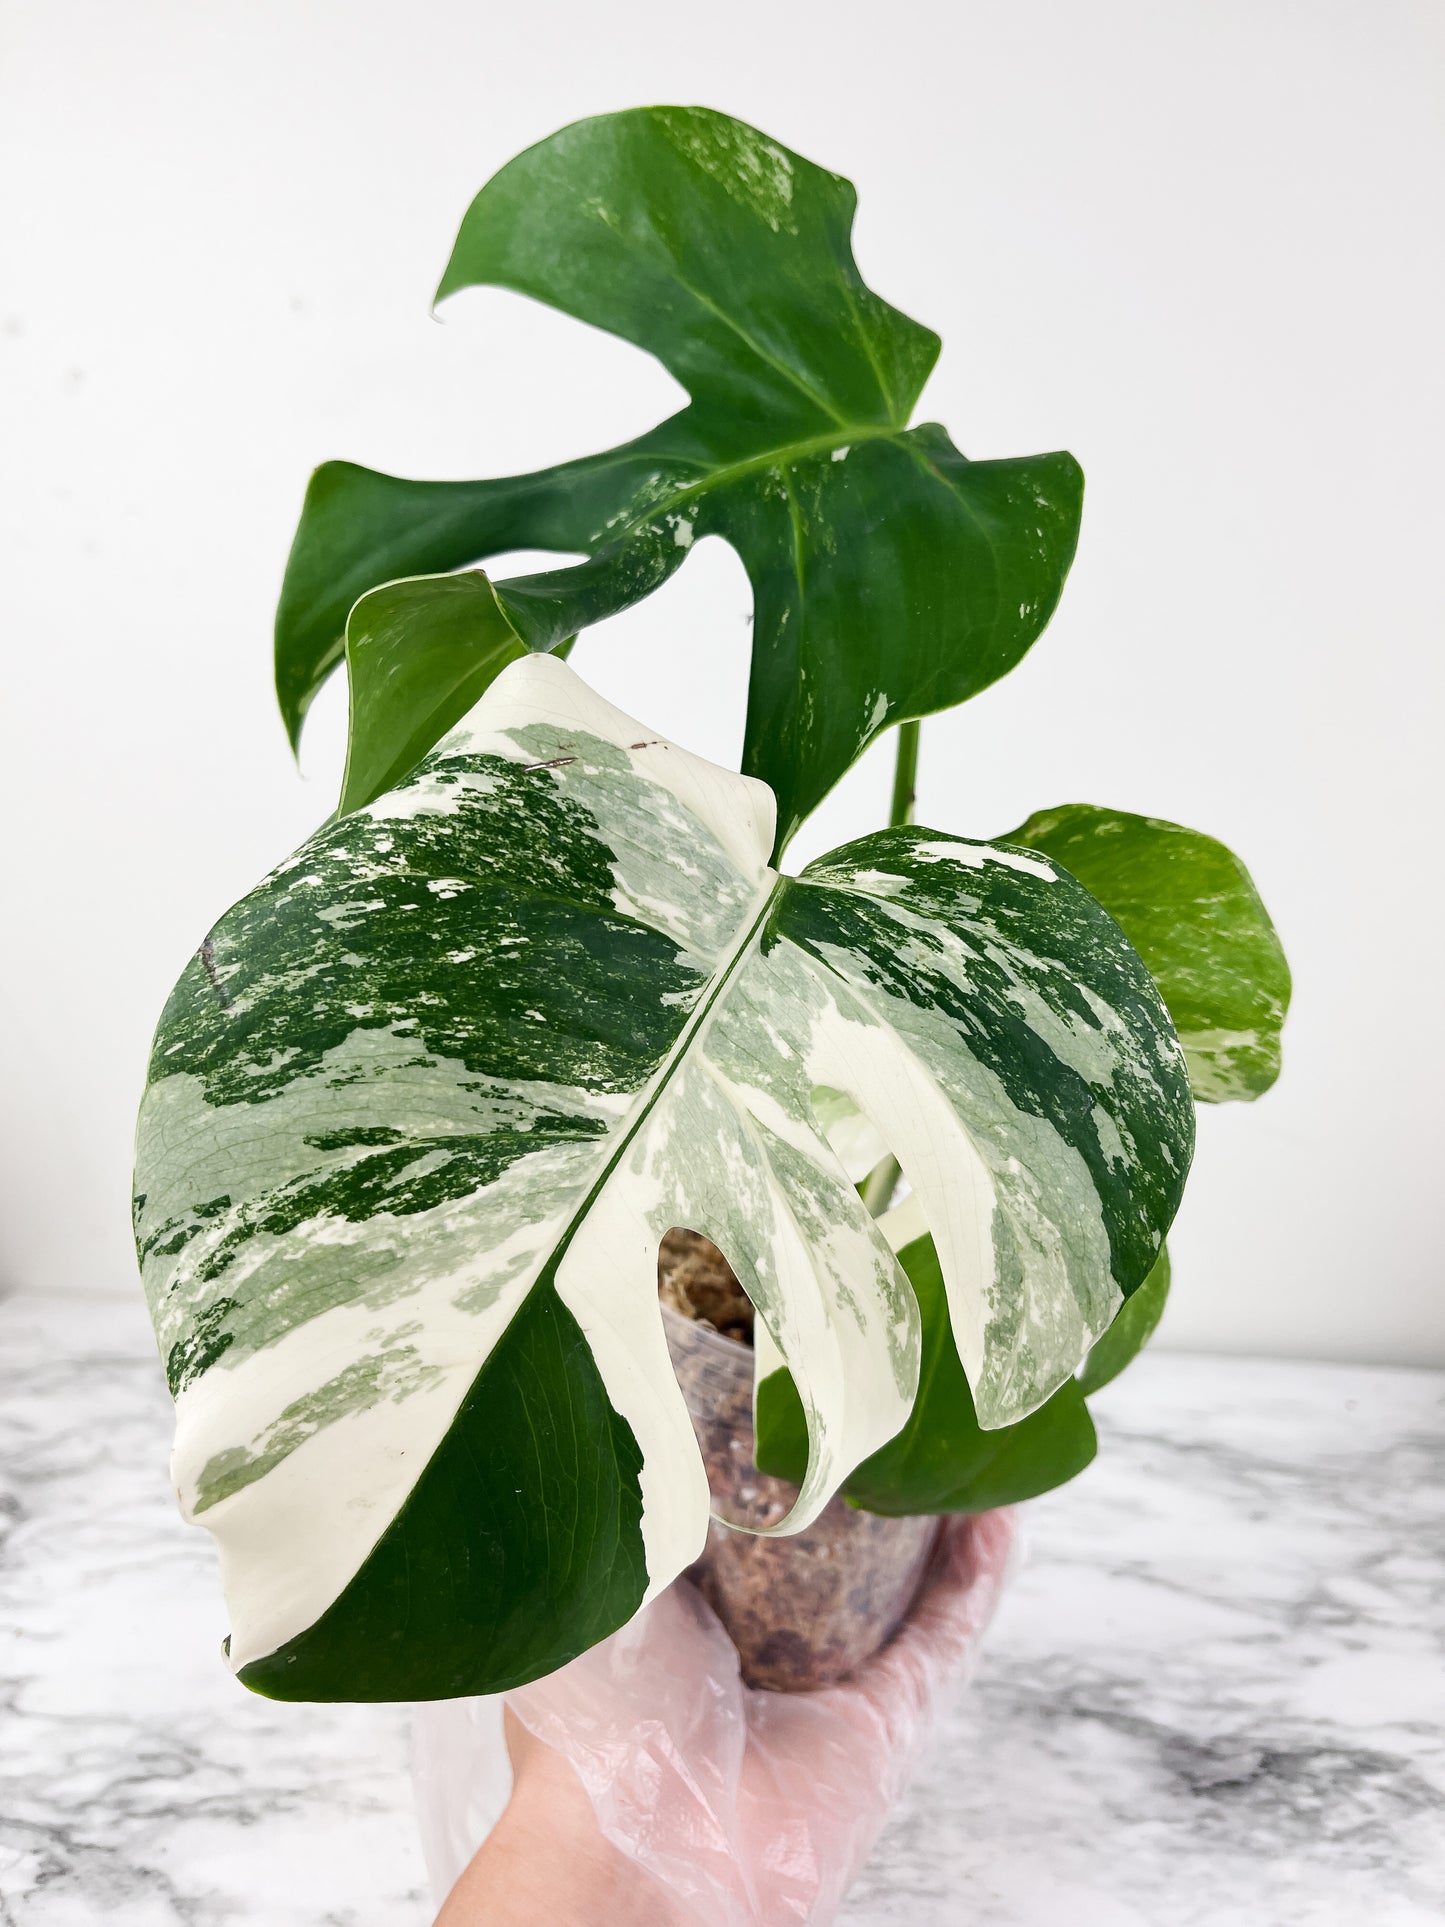 Monstera Albo Borsigiana 1 leaf water rooting cutting from a highly variegated plant